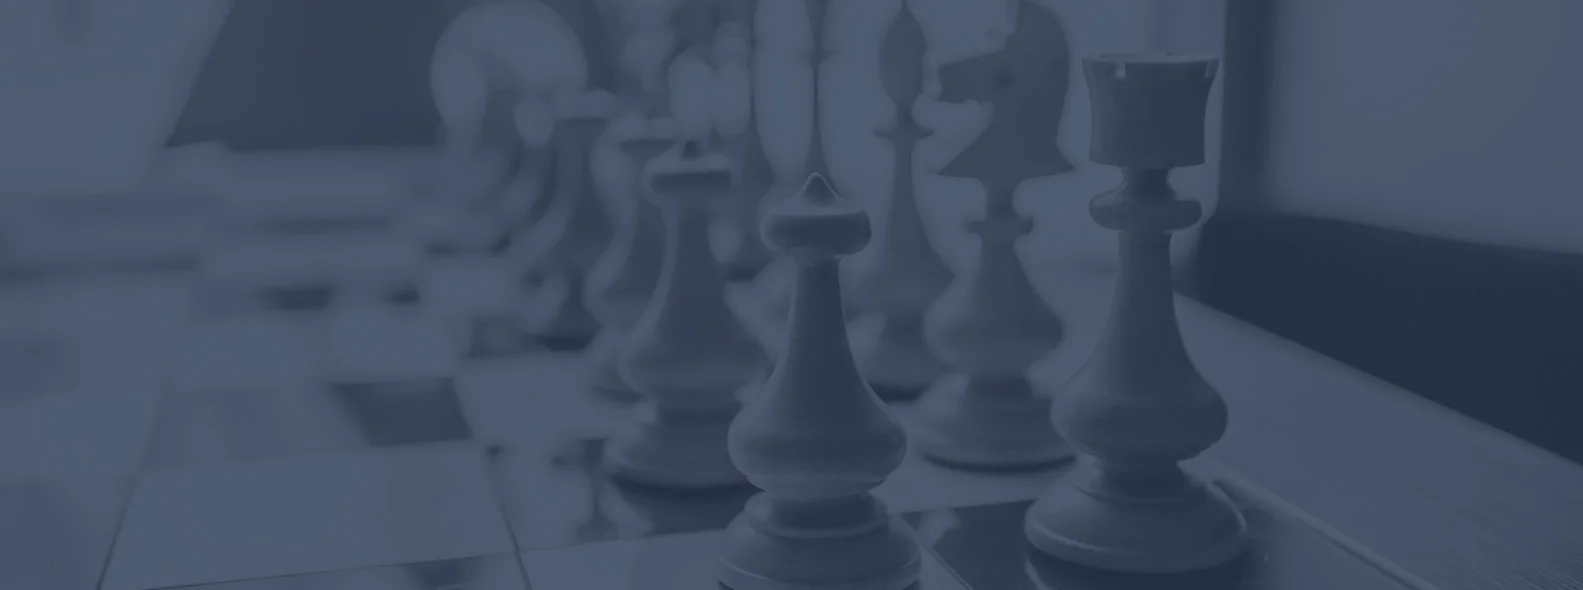 A chess board with chess pieces representing due diligence consulting as the next strategic move in your business strategy